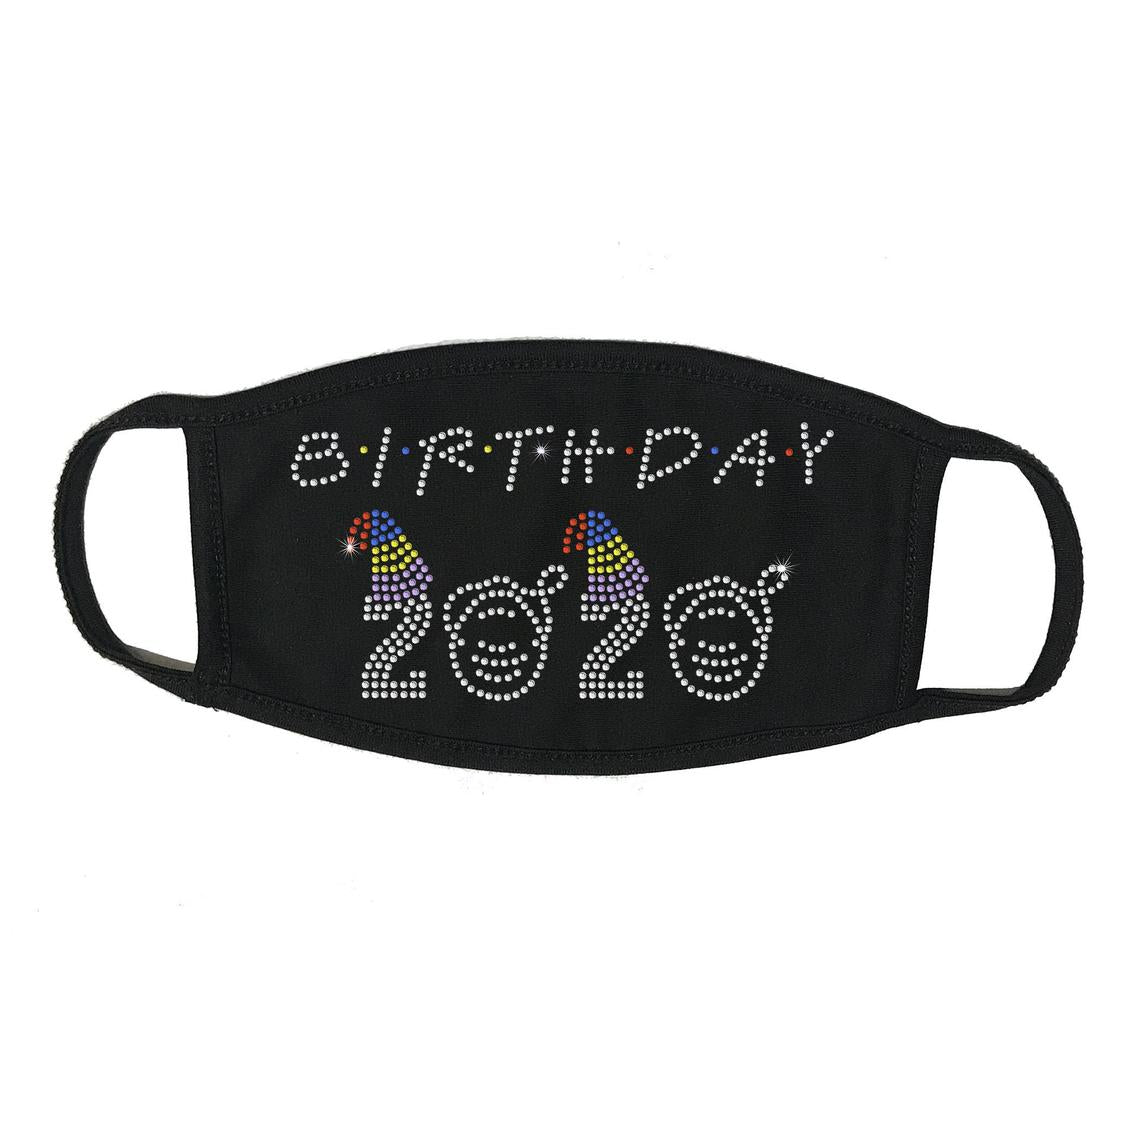 Rhinestone Face Mask, Face Cover, Birthday 2020 in Friends Style